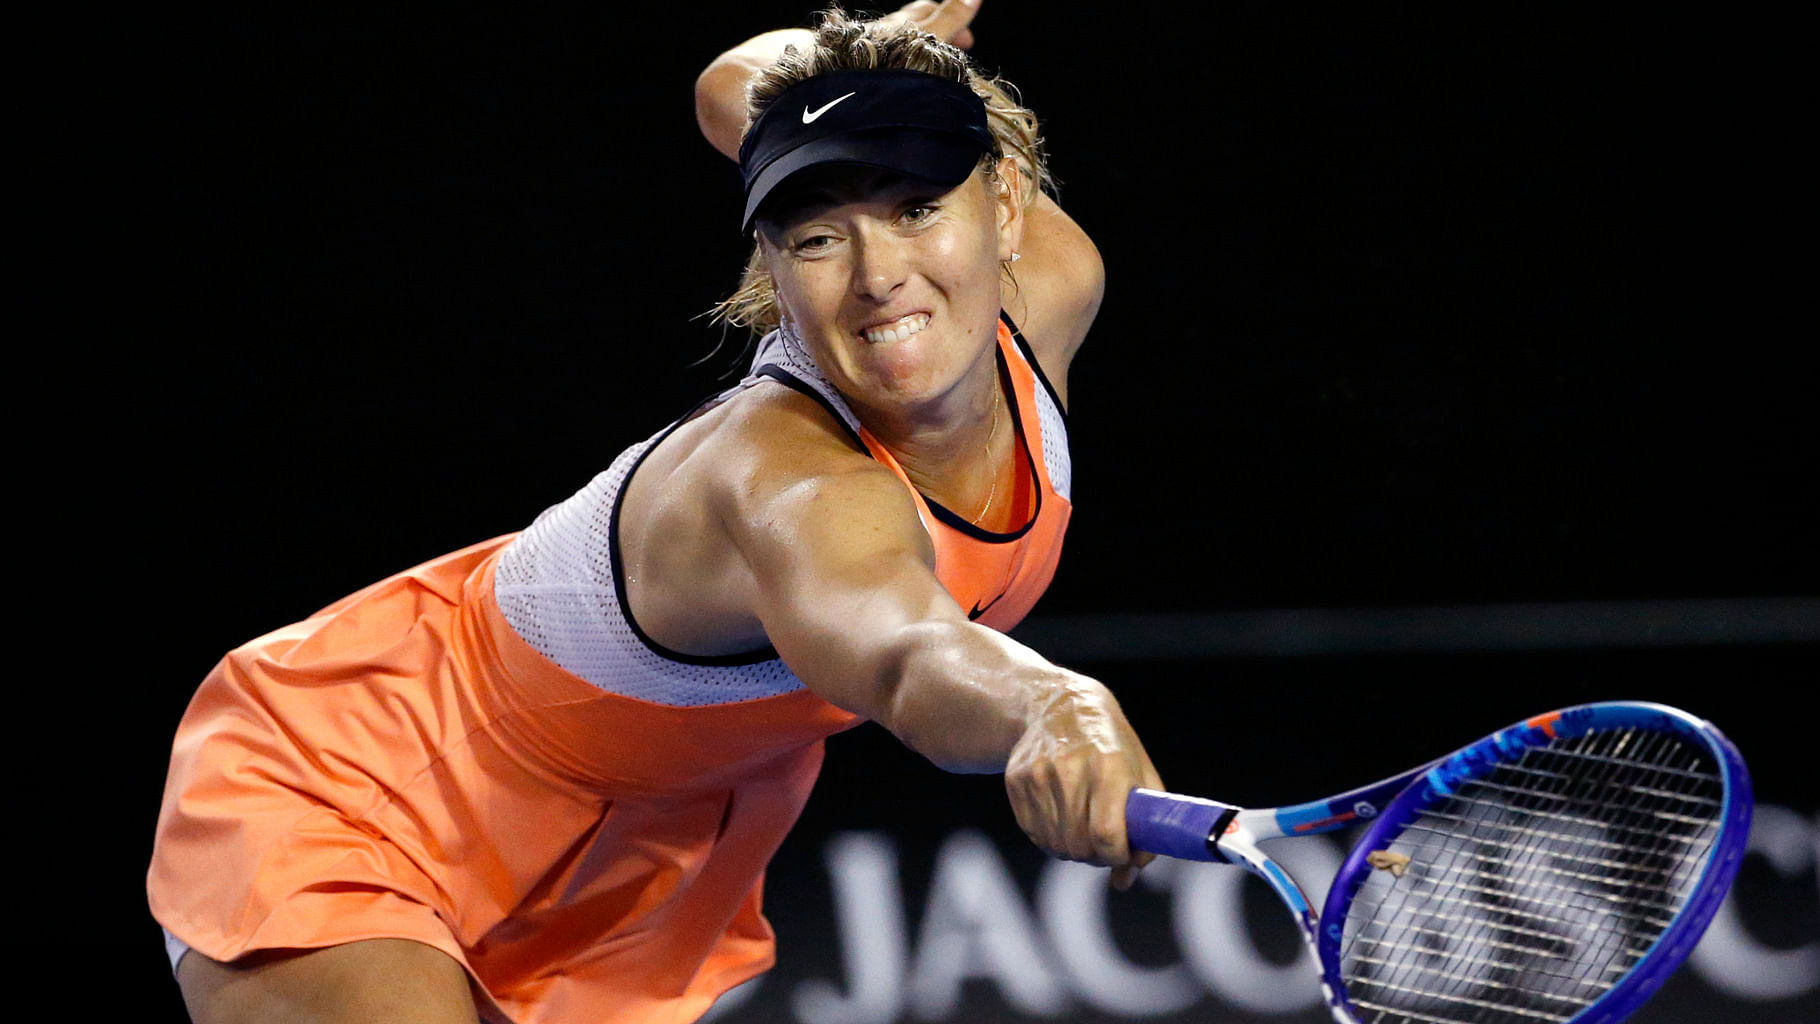 Maria Sharapova failed a drug test for using meldonium, a substance she did not know was banned. (Photo: AP)